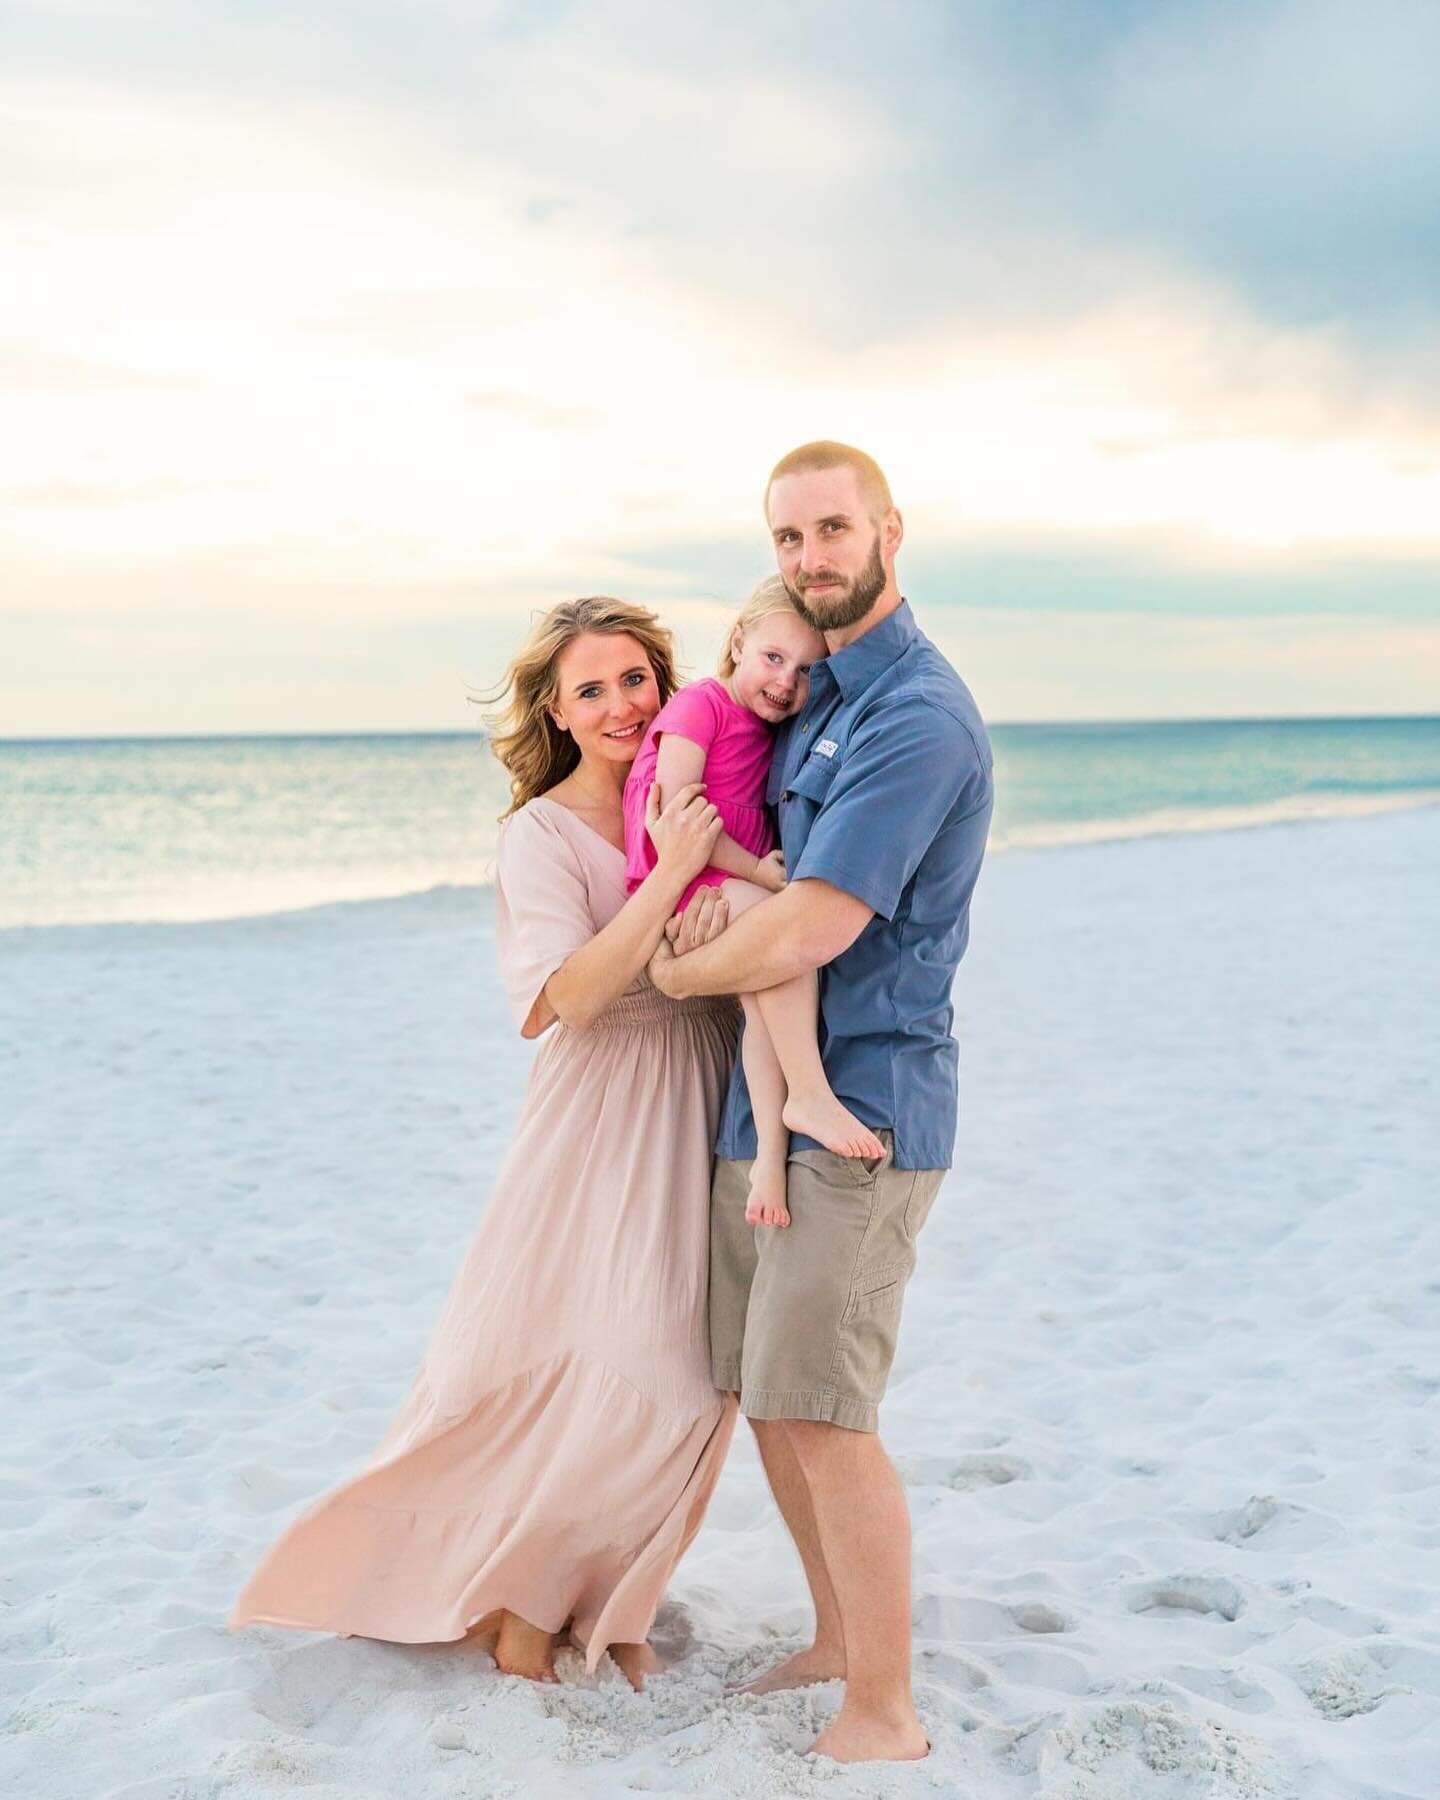 Check out my website! www.jessicasalort.com
😃Happy photos for my happy clients!
✅ Excellent reviews
🎯Fast turnaround

☎️Call Me! 850-313-1586 

#navarrebeachphotographer
#navarrefamilyphotographer
#navarrephotographer
#navarreflorida
#jessicasalort